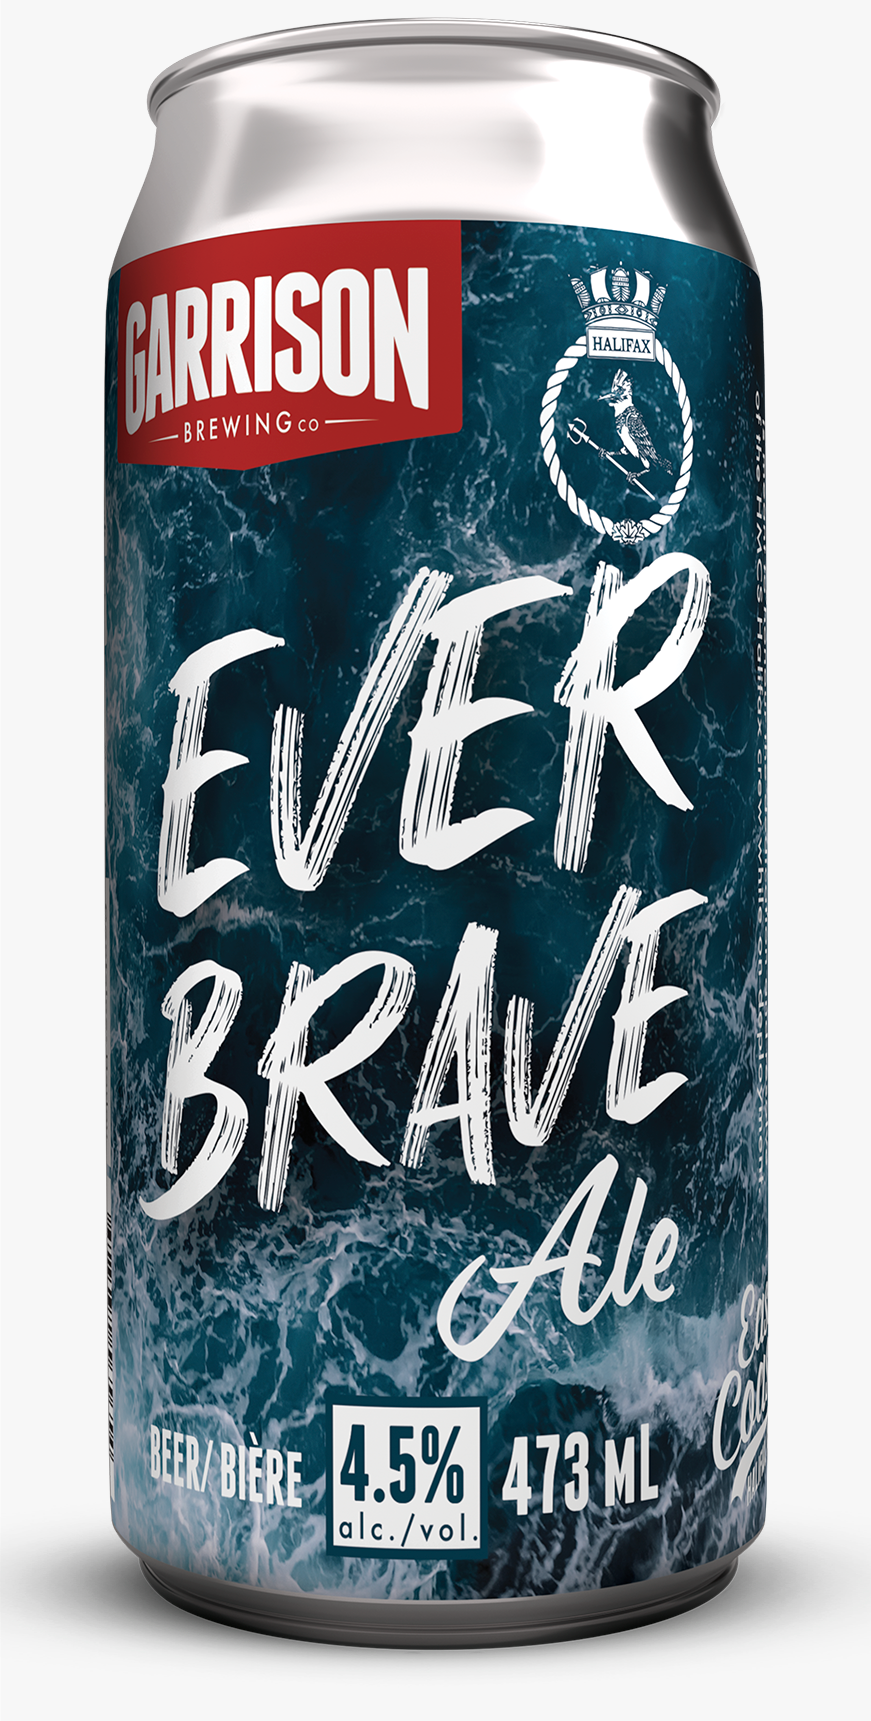 Ever Brave Ale: Single 473ml can